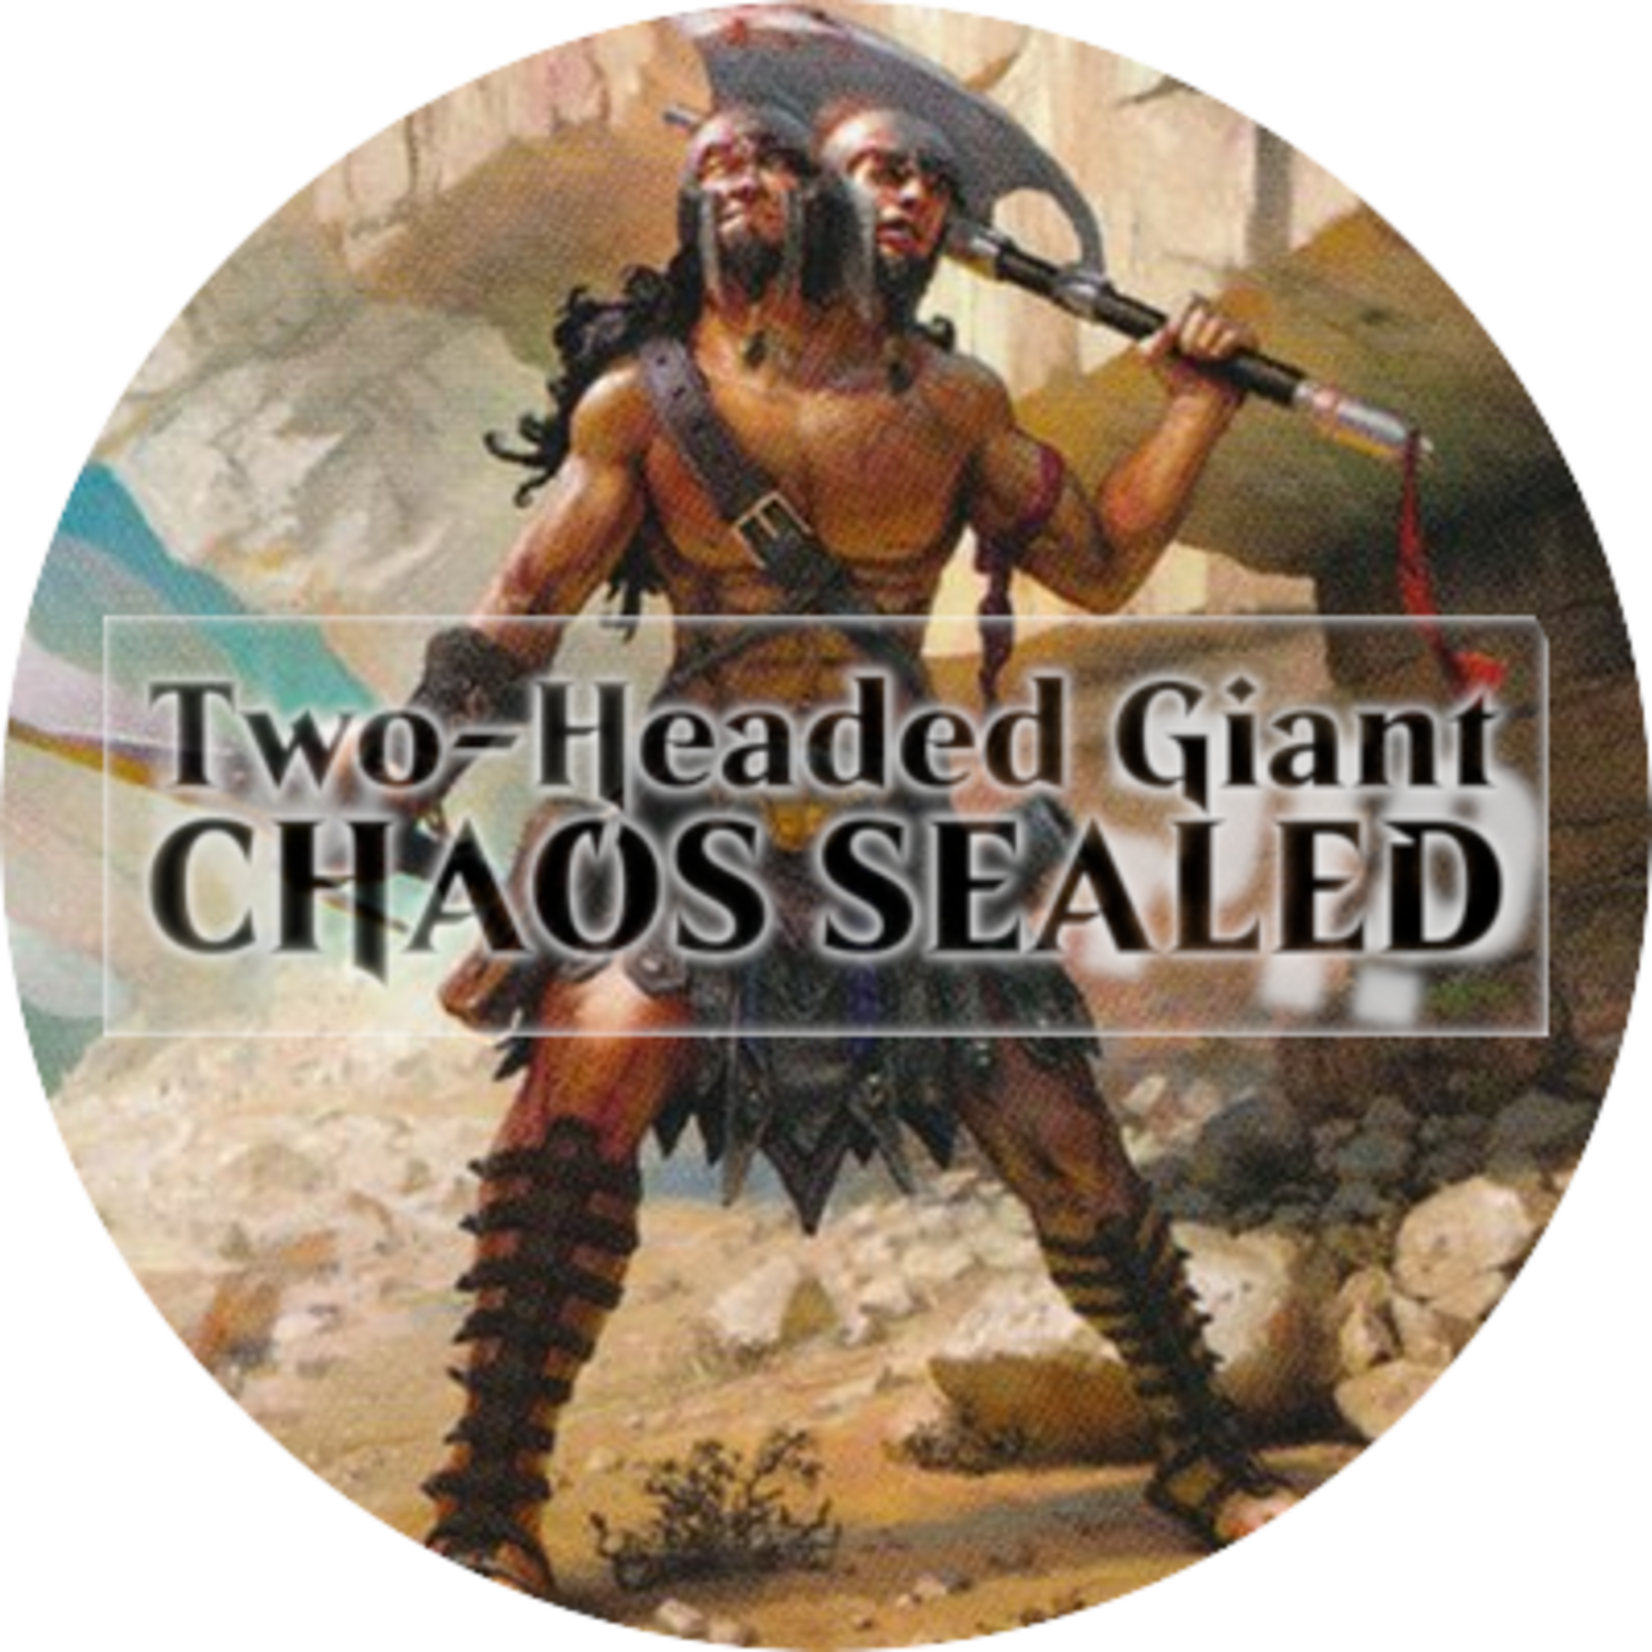 Wizards of the Coast Admission: Two-Headed Giant Chaos Sealed (March 26 Downers Grove 3 PM)